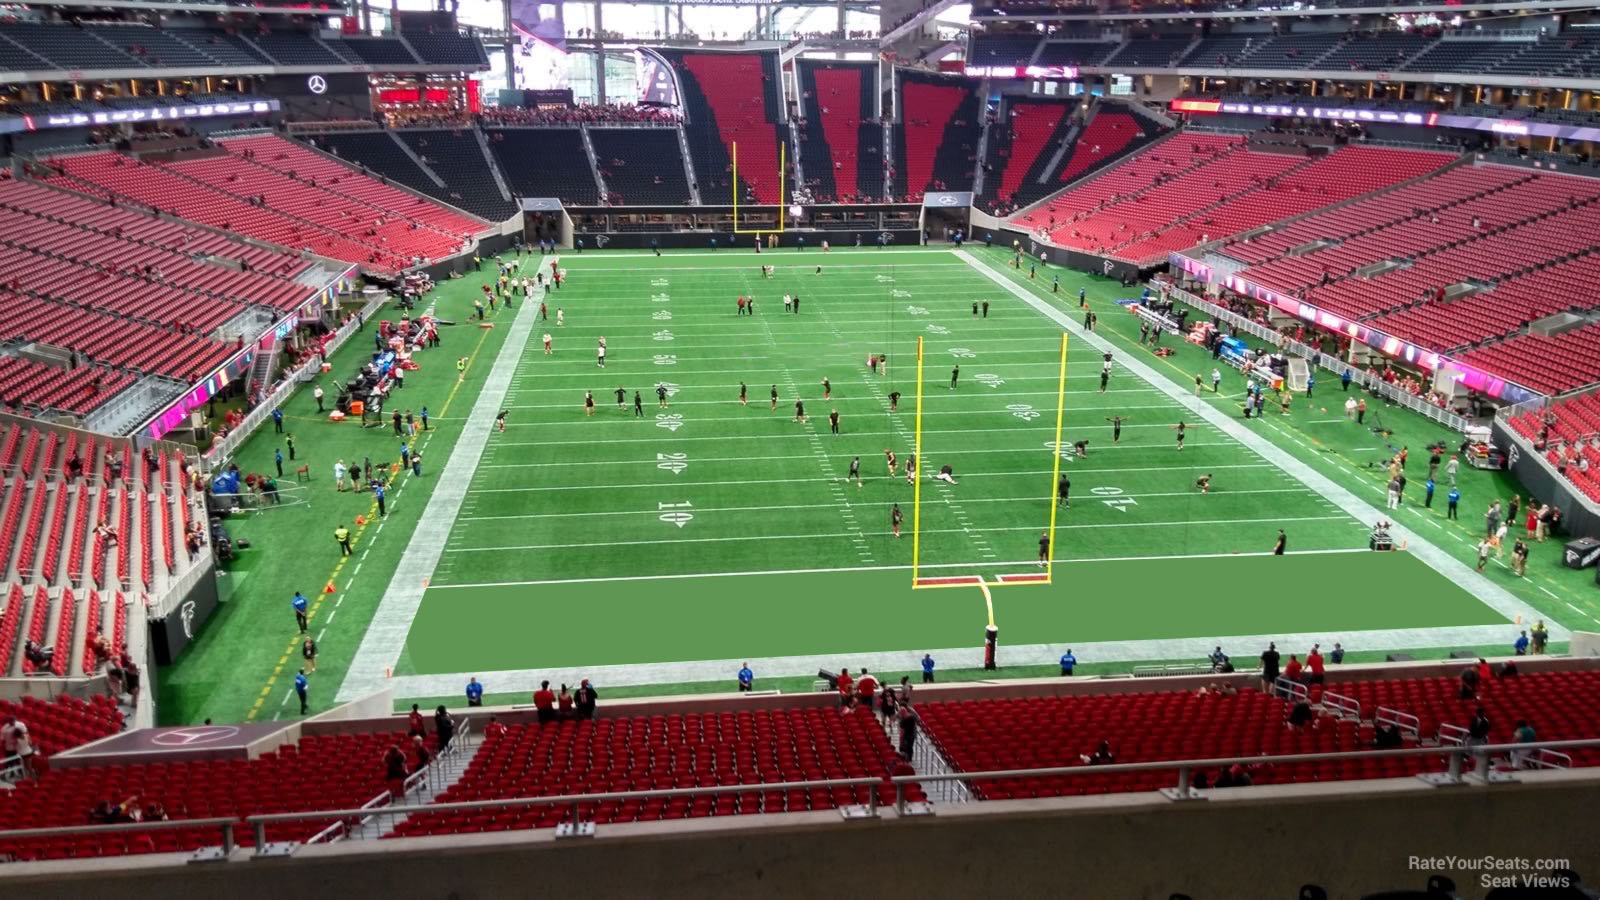 section 225, row 5 seat view  for football - mercedes-benz stadium